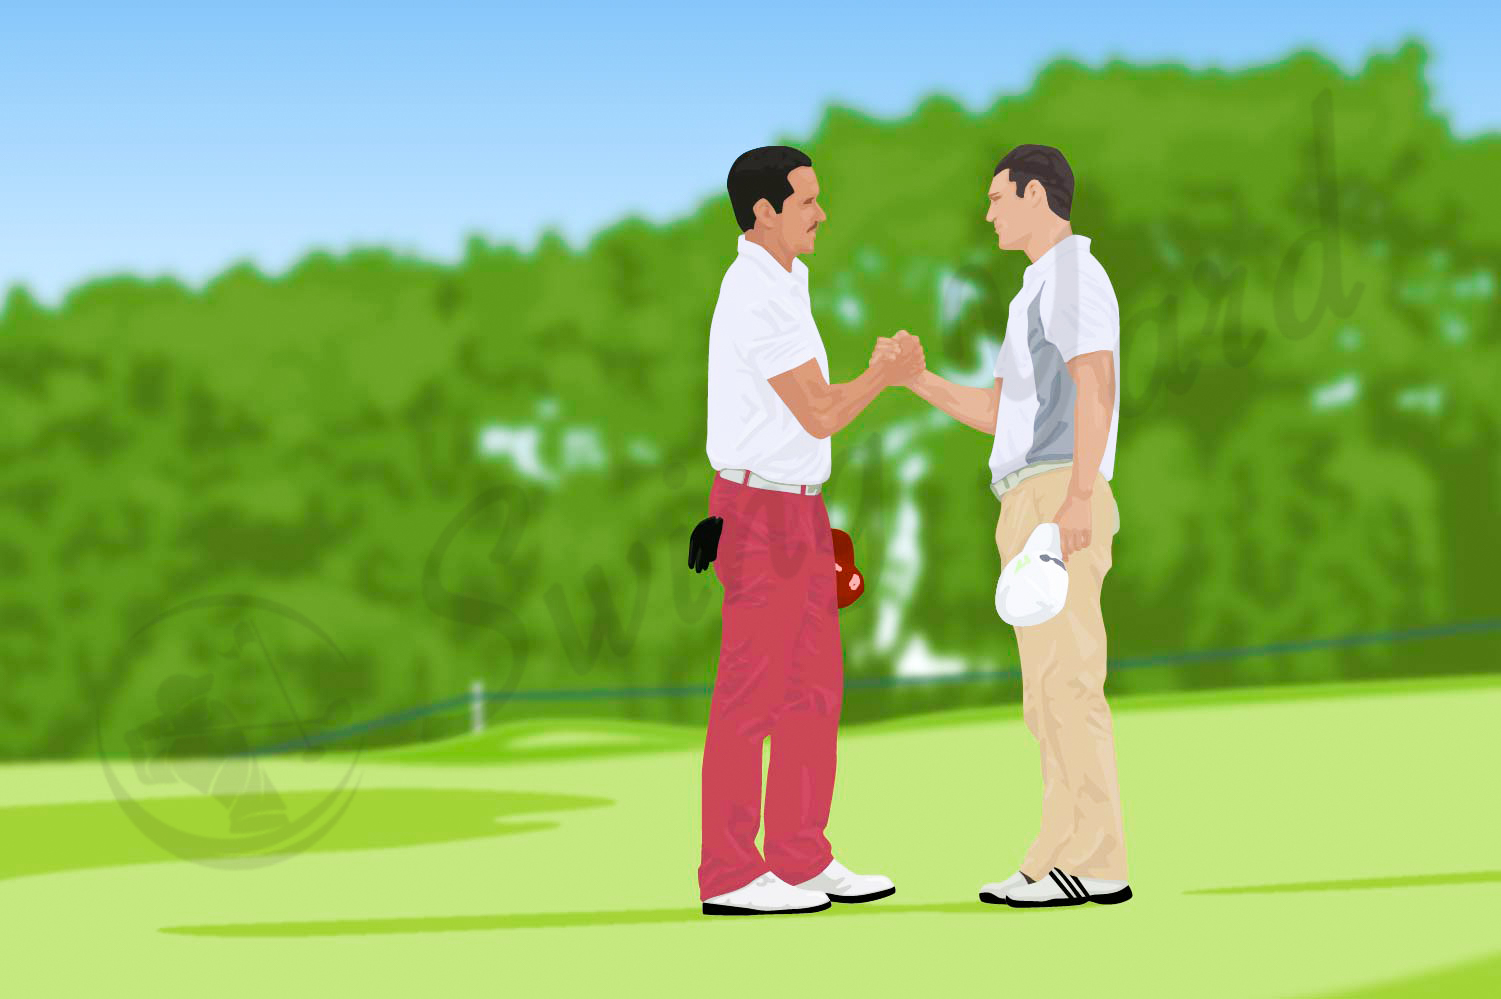 Two golfers shaking hands after some fun games on the course